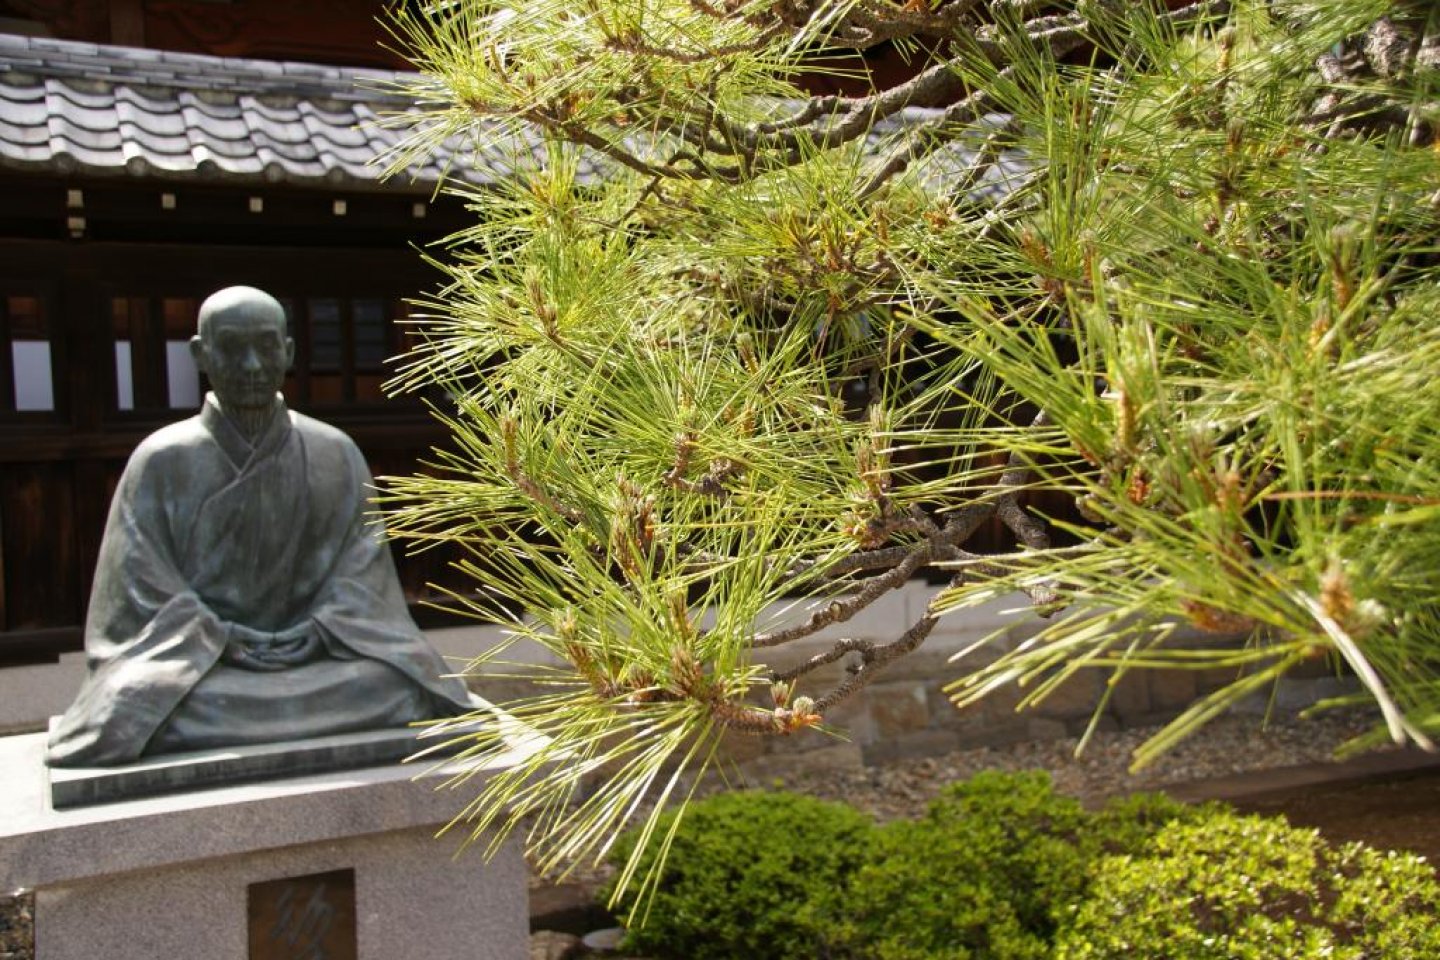 Sengakuji Temple offers a little bit of nature and serenity